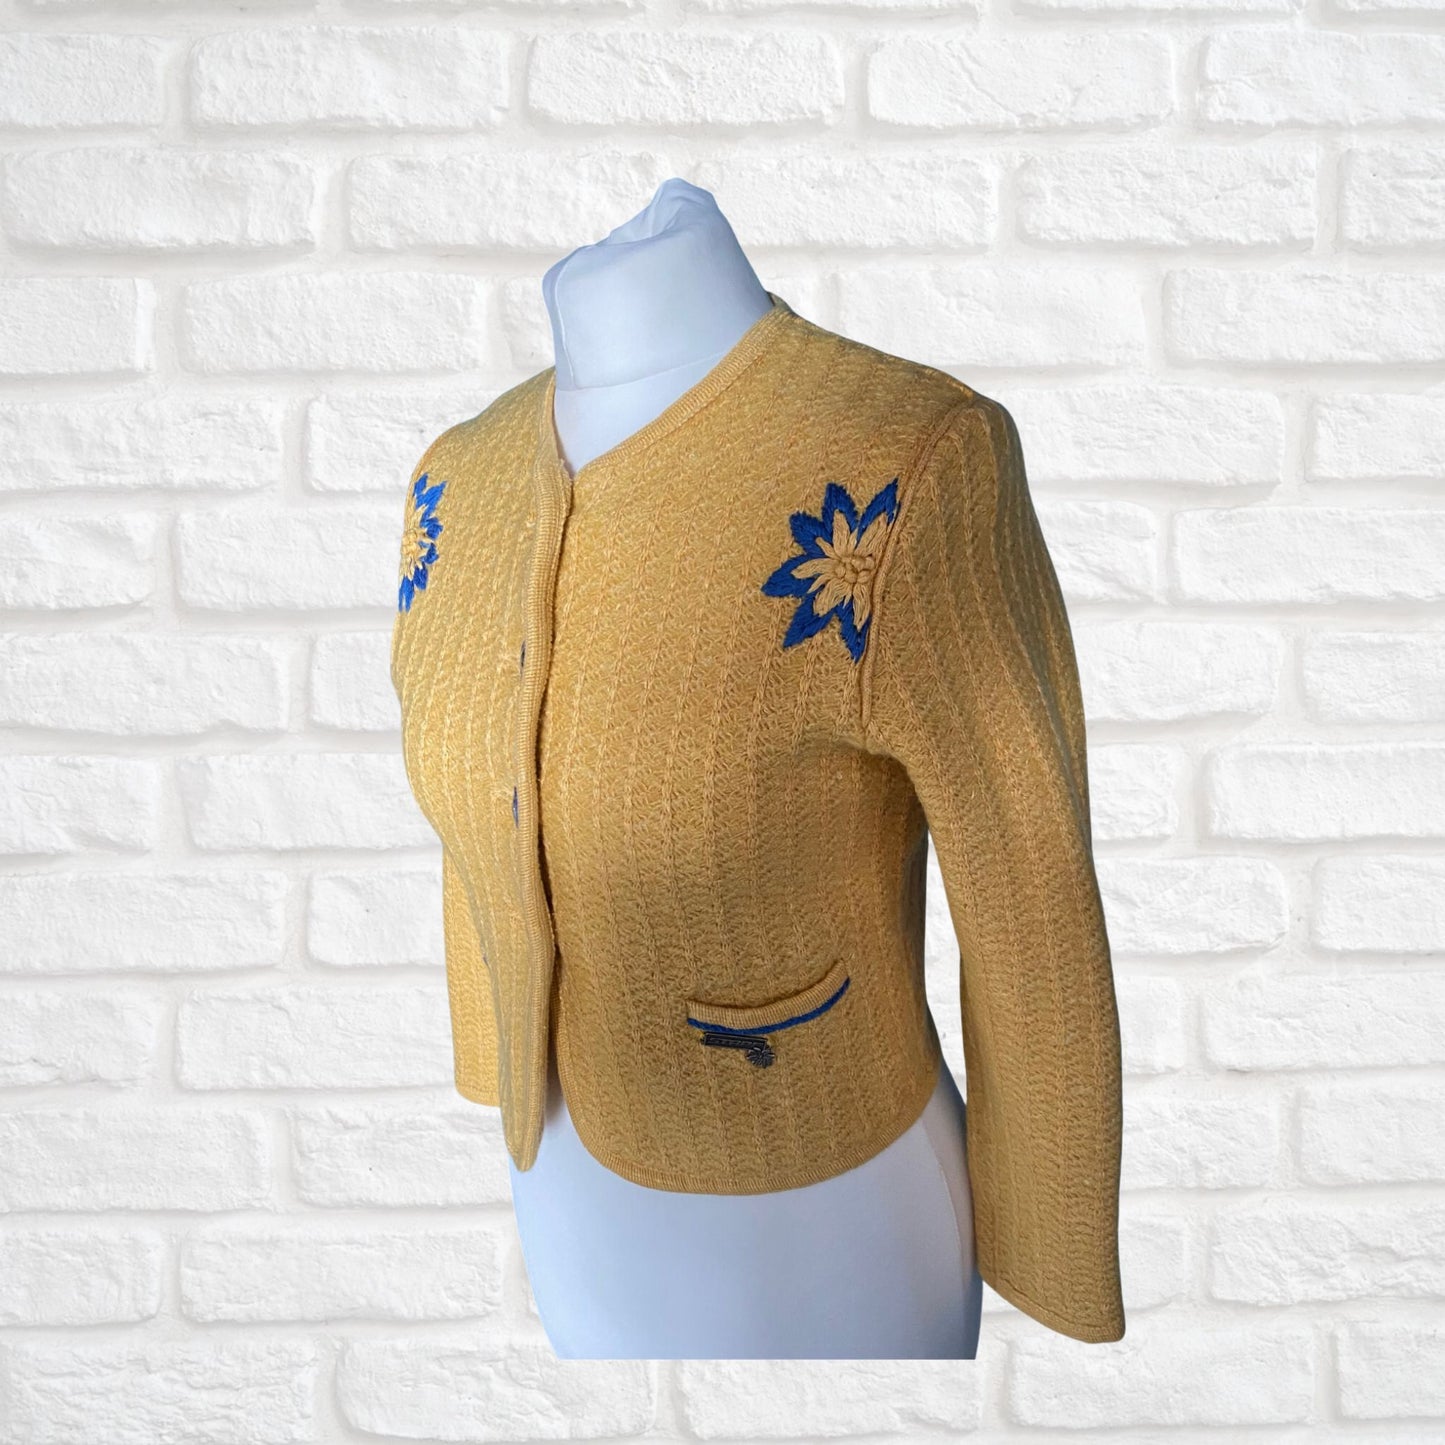 Vintage Yellow Cropped Cardigan with embroidered blue  flower motif. Approx UK size 8-10